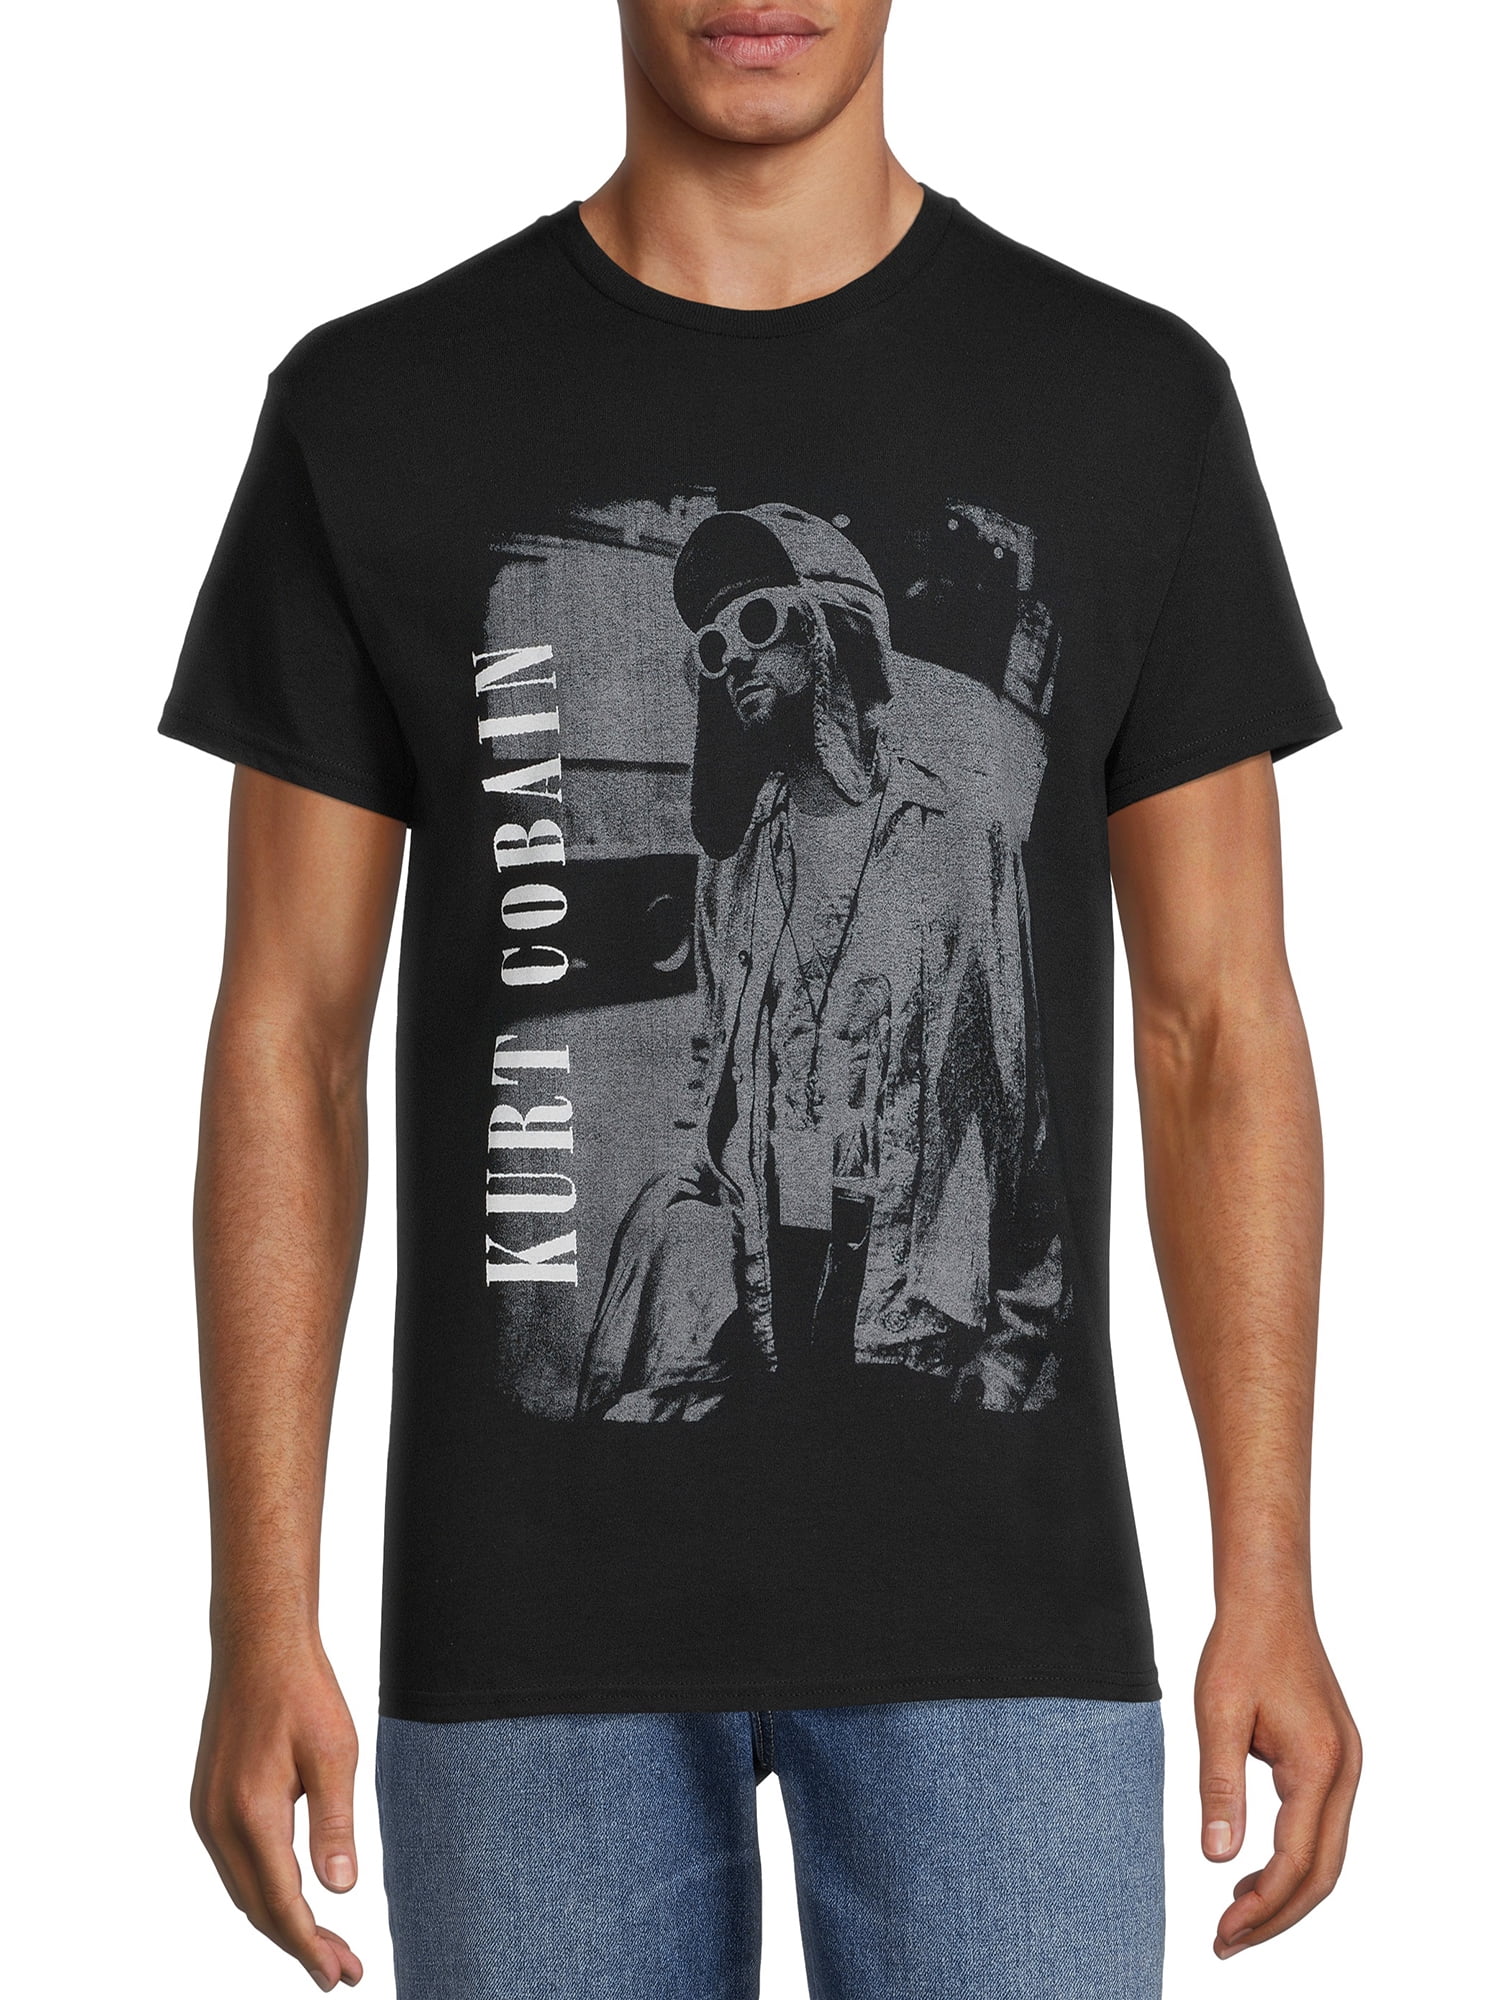 GRUNGE IS DEAD T-SHIRT Mens Kurt Cobain Hi How are you Nirvana As Worn By Adults 